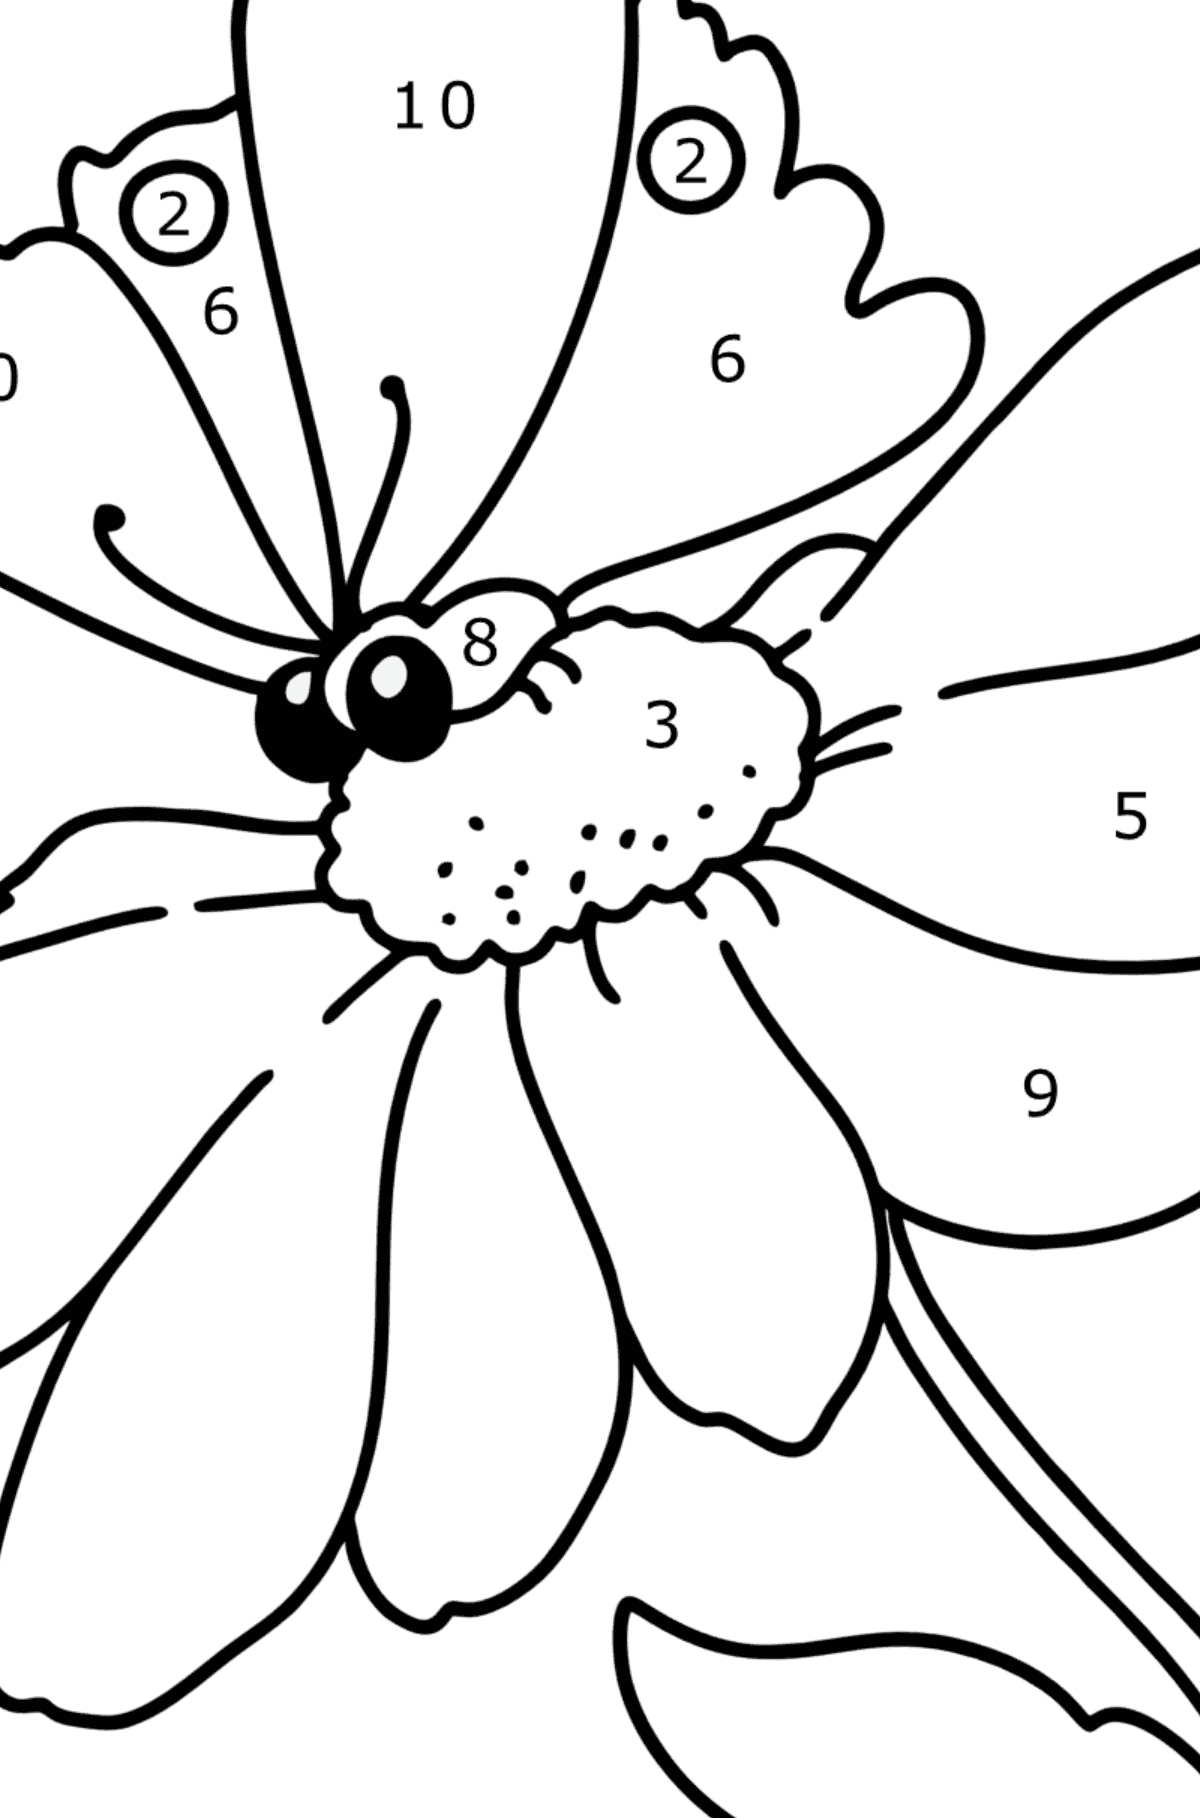 Summer Coloring page - Flowers and Butterfly - Coloring by Numbers for Kids